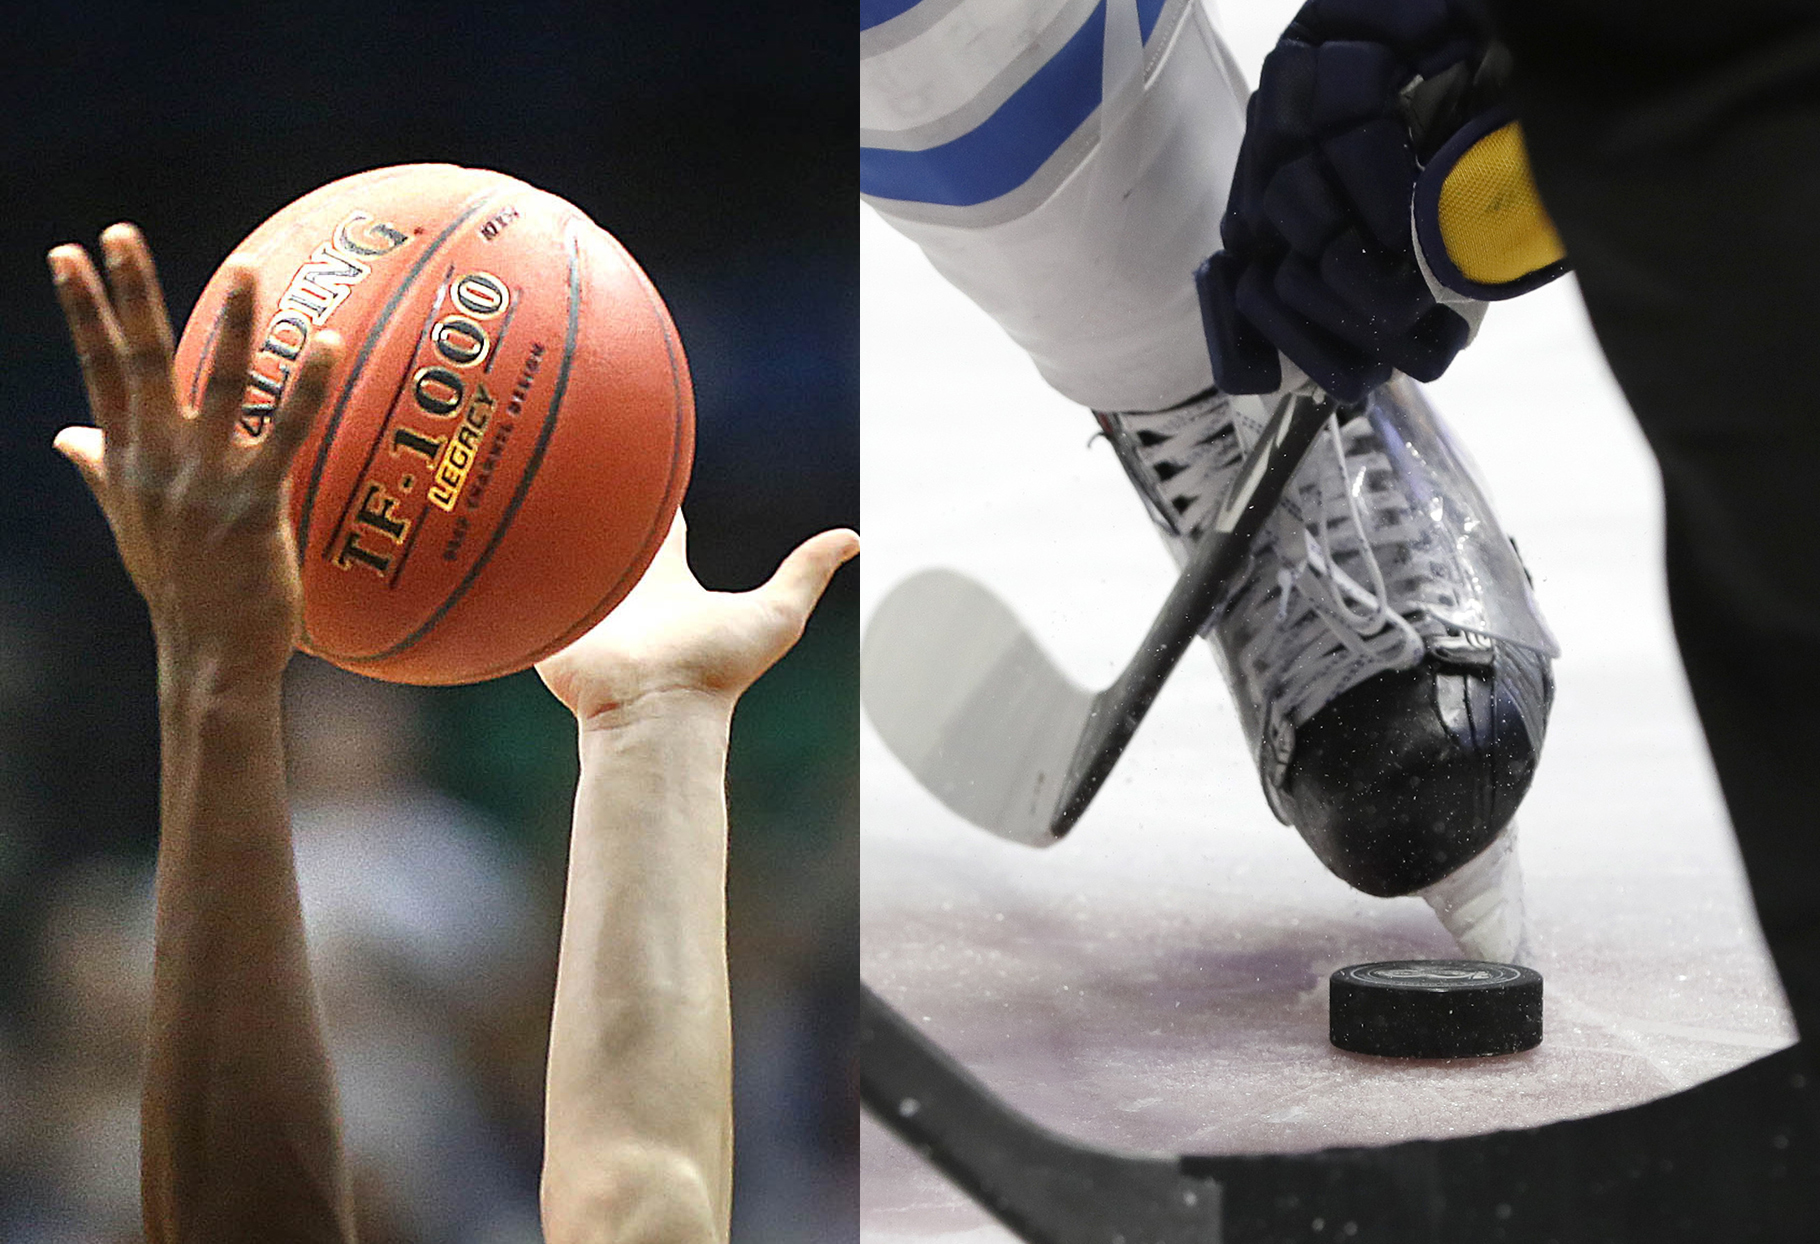 Best in preps -- state basketball or hockey tournaments?